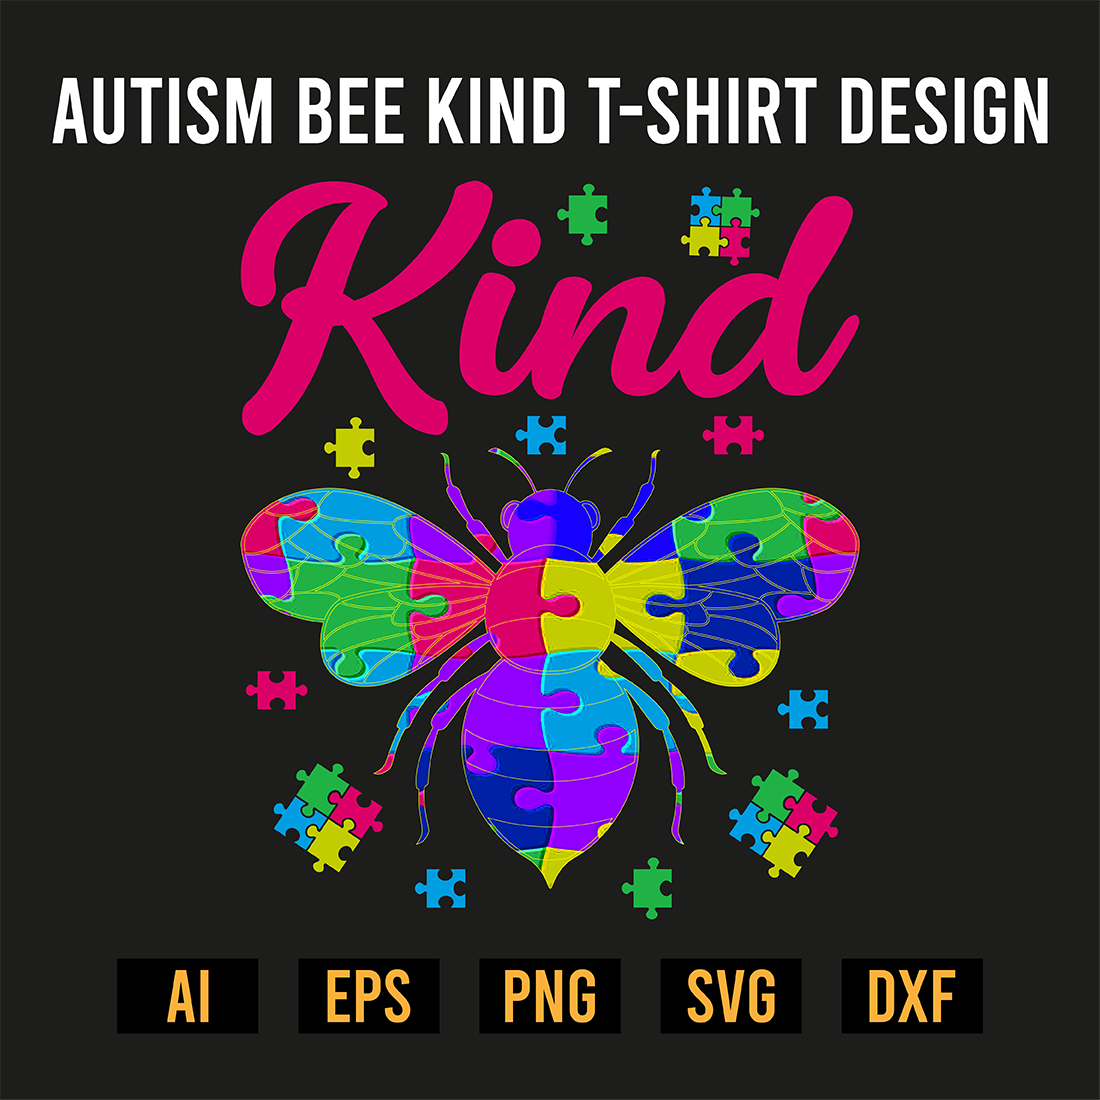 Autism Bee Kind T- Shirt Design cover image.